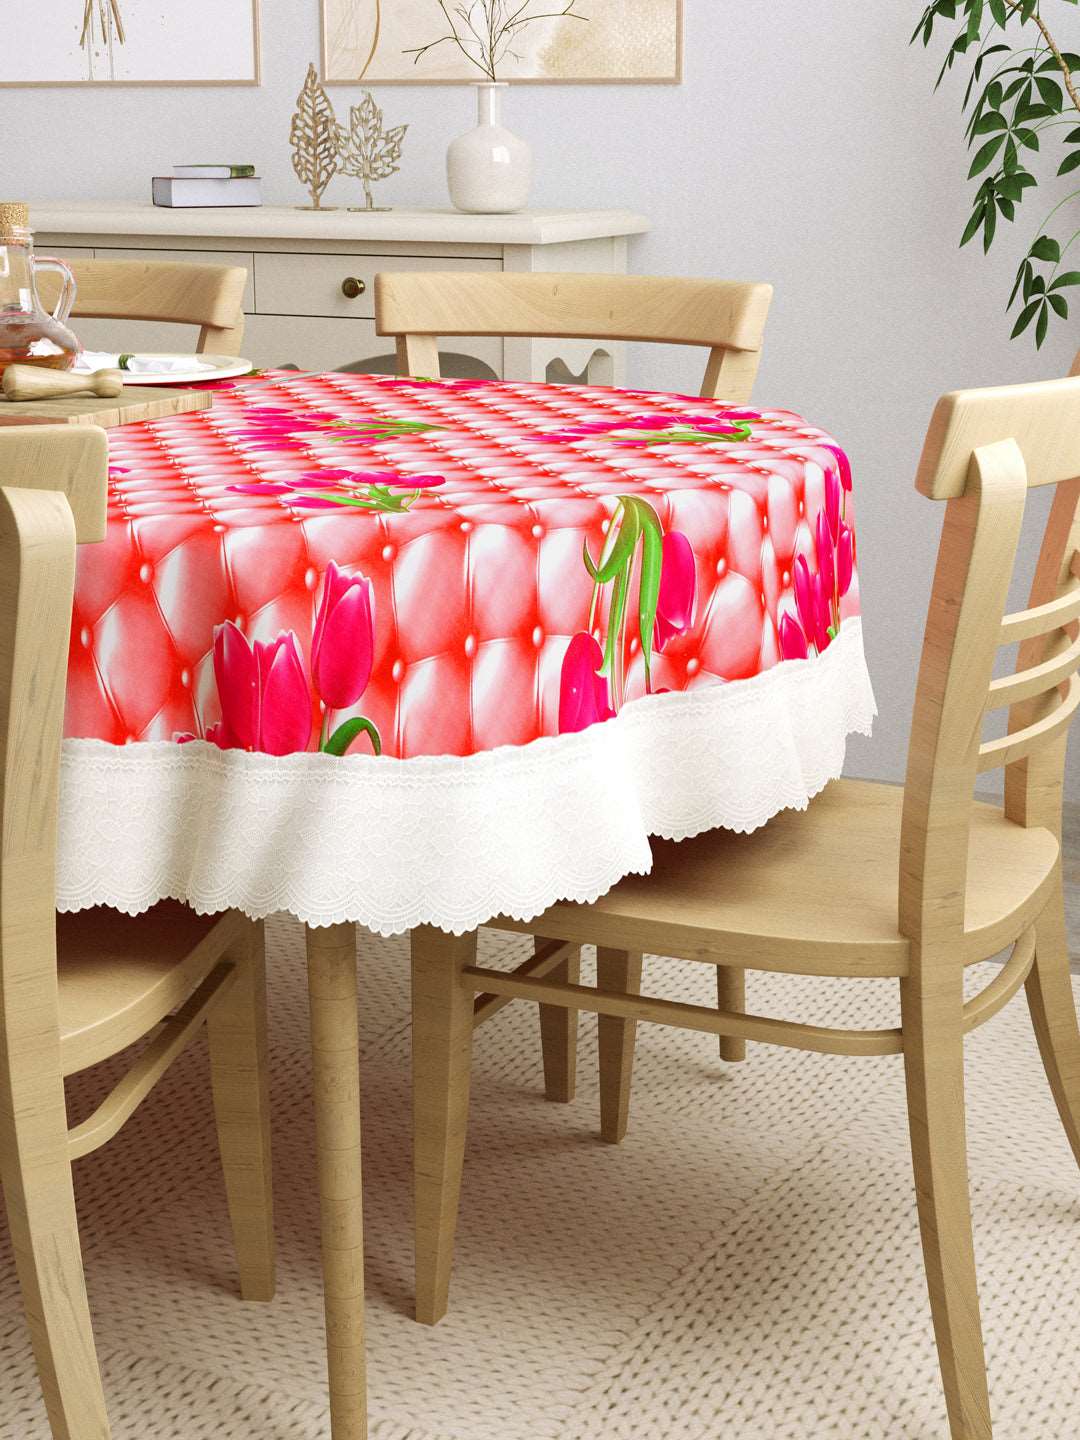 6 Seater Oval Dining Table Cover; 60x90 Inches; Material - PVC; Anti Slip; Pink Roses On Pink